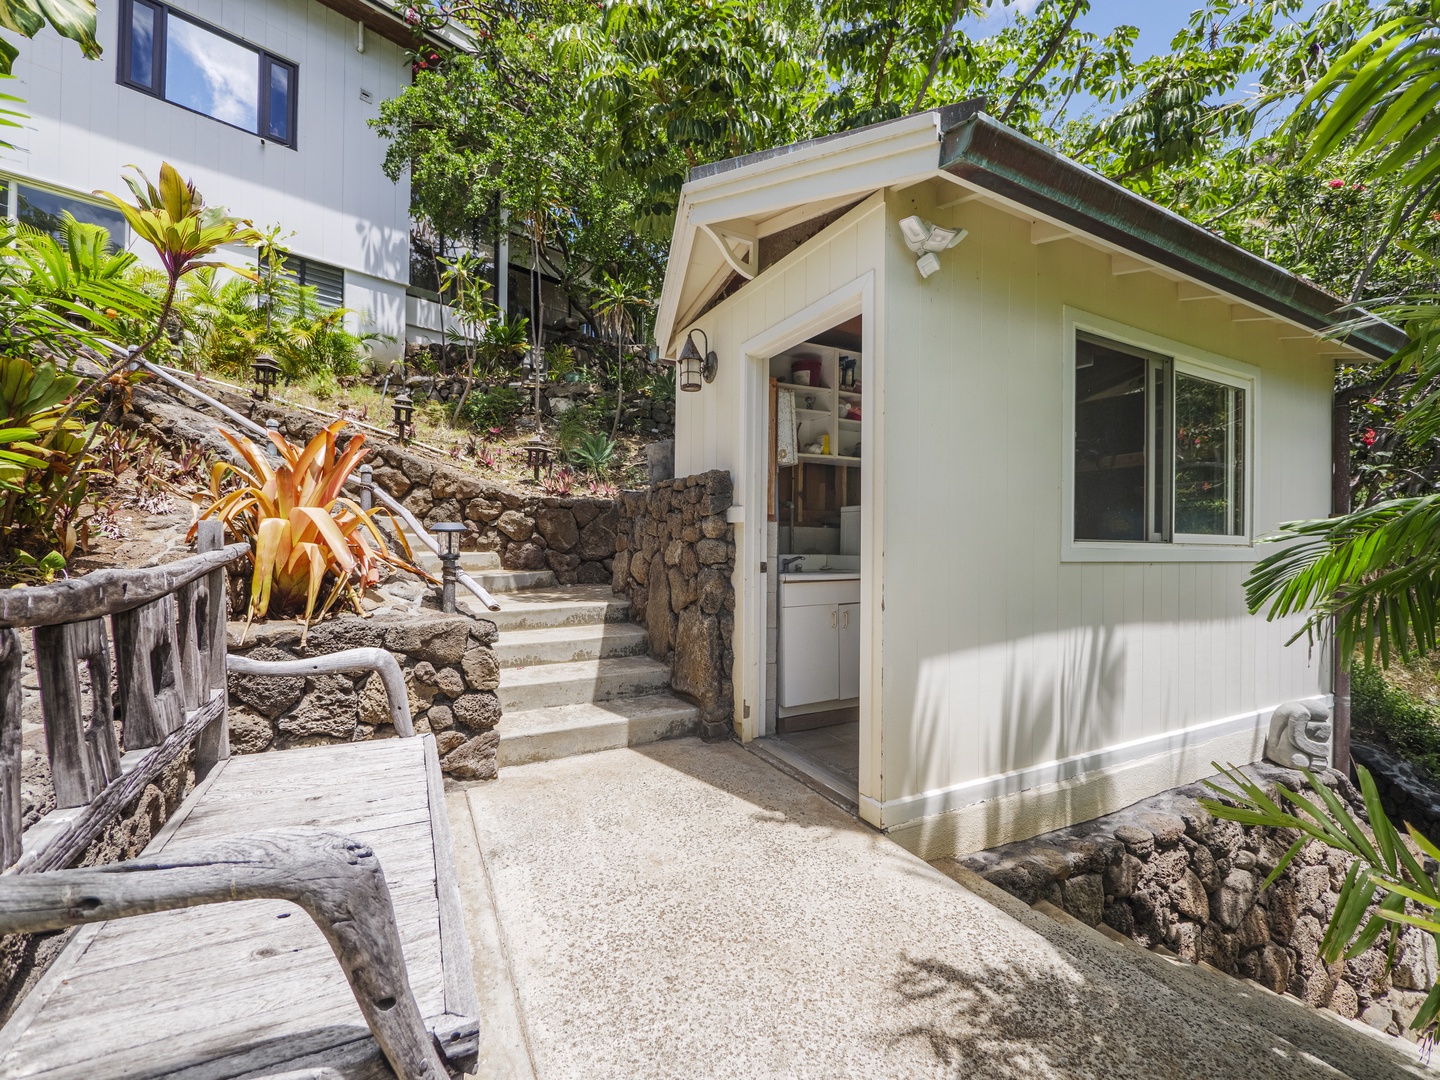 Honolulu Vacation Rentals, Diamond Head Bali Retreat** - A dedicated caretaker resides on-site in a separate dwelling, ensuring any of your needs are promptly addressed.